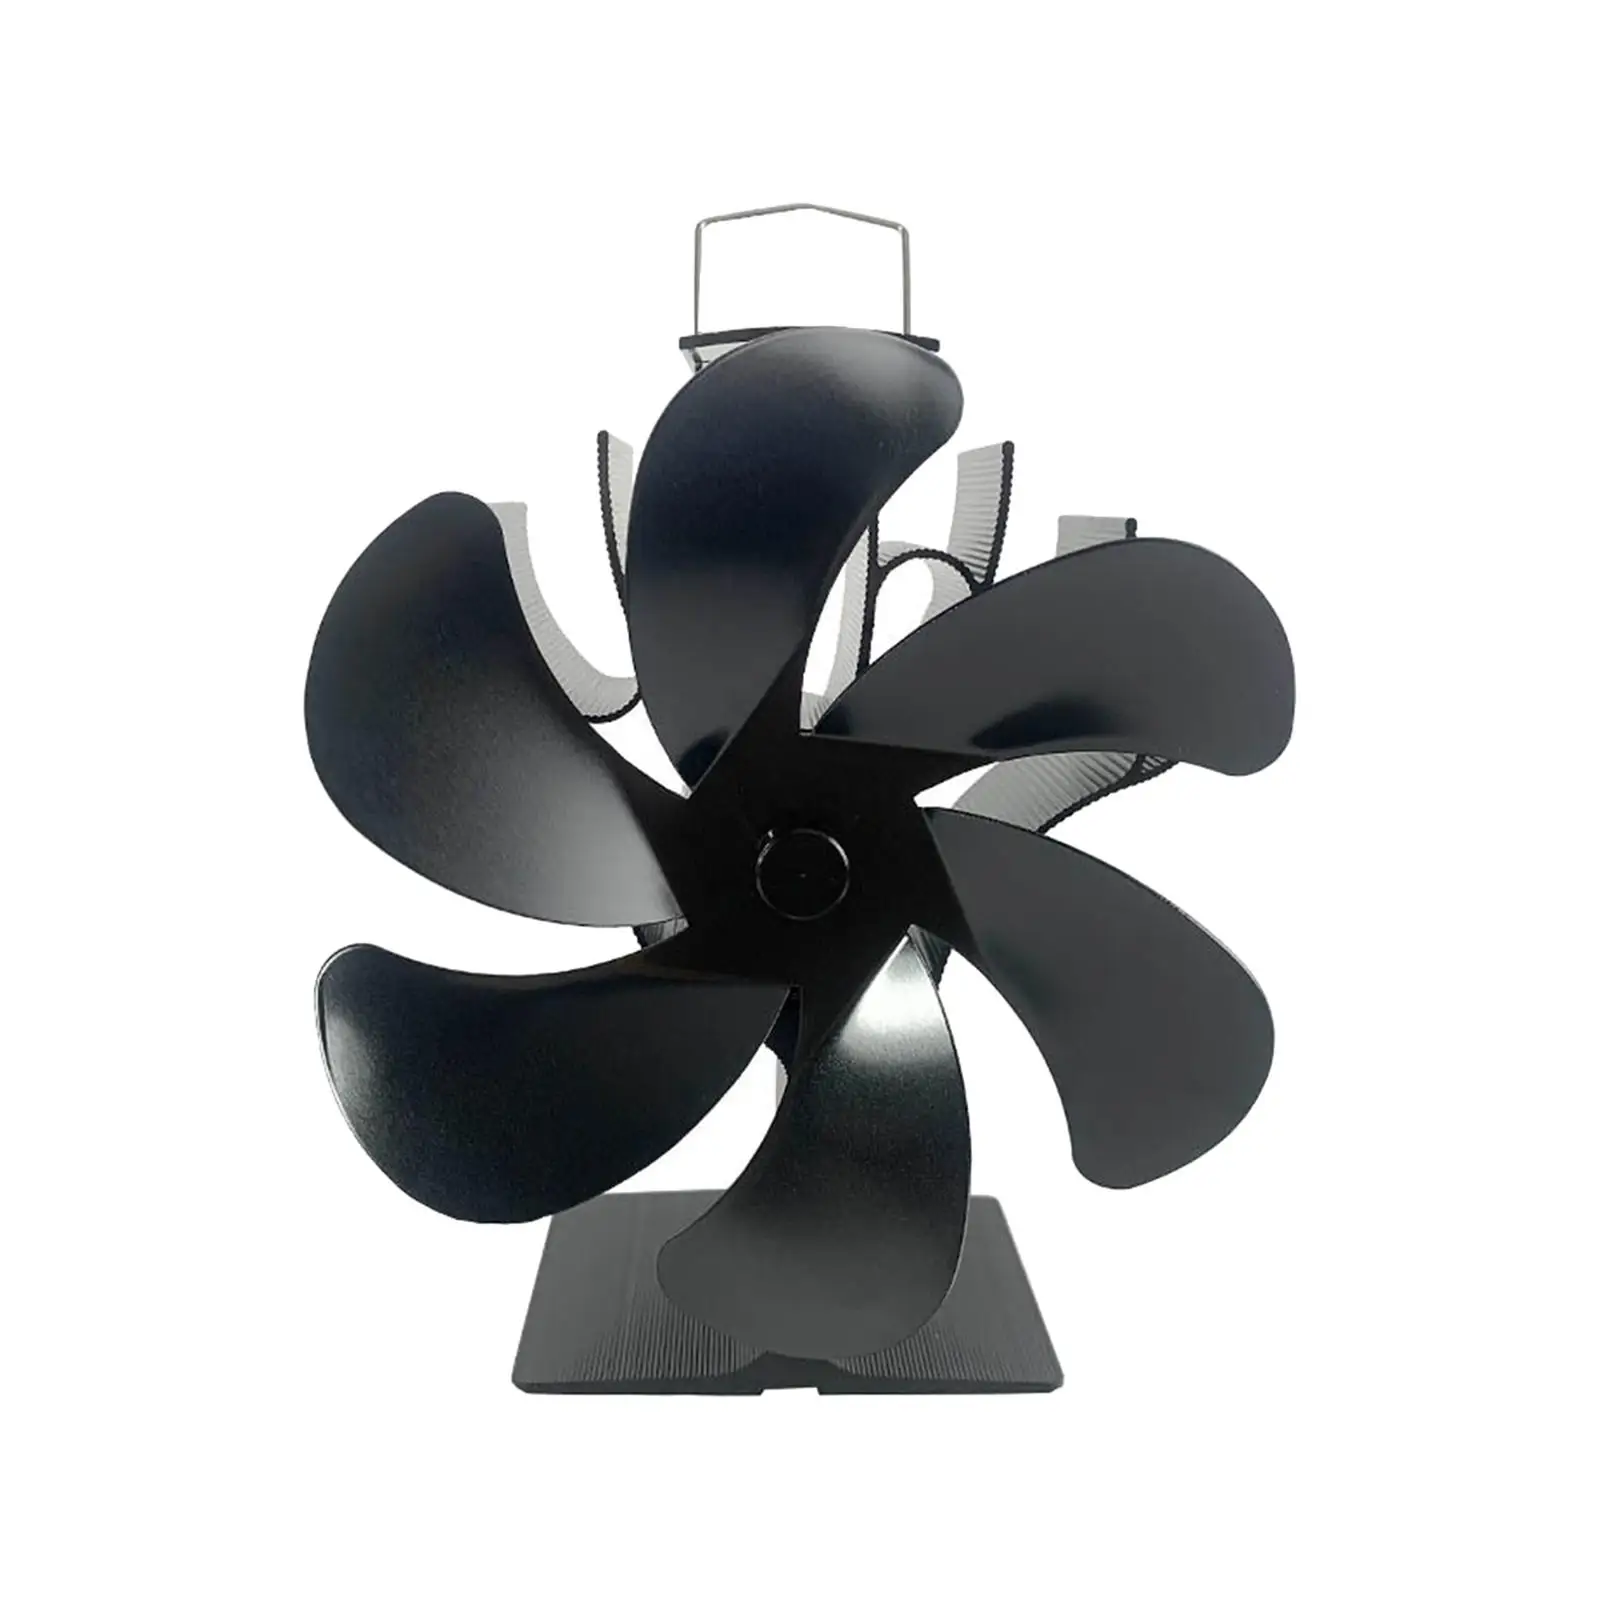 6 Blades Heat Powered Fireplace Fan Circulating Warm Wood Stove Fan for Burner Heaters Fireplace Wood Stove Accessories